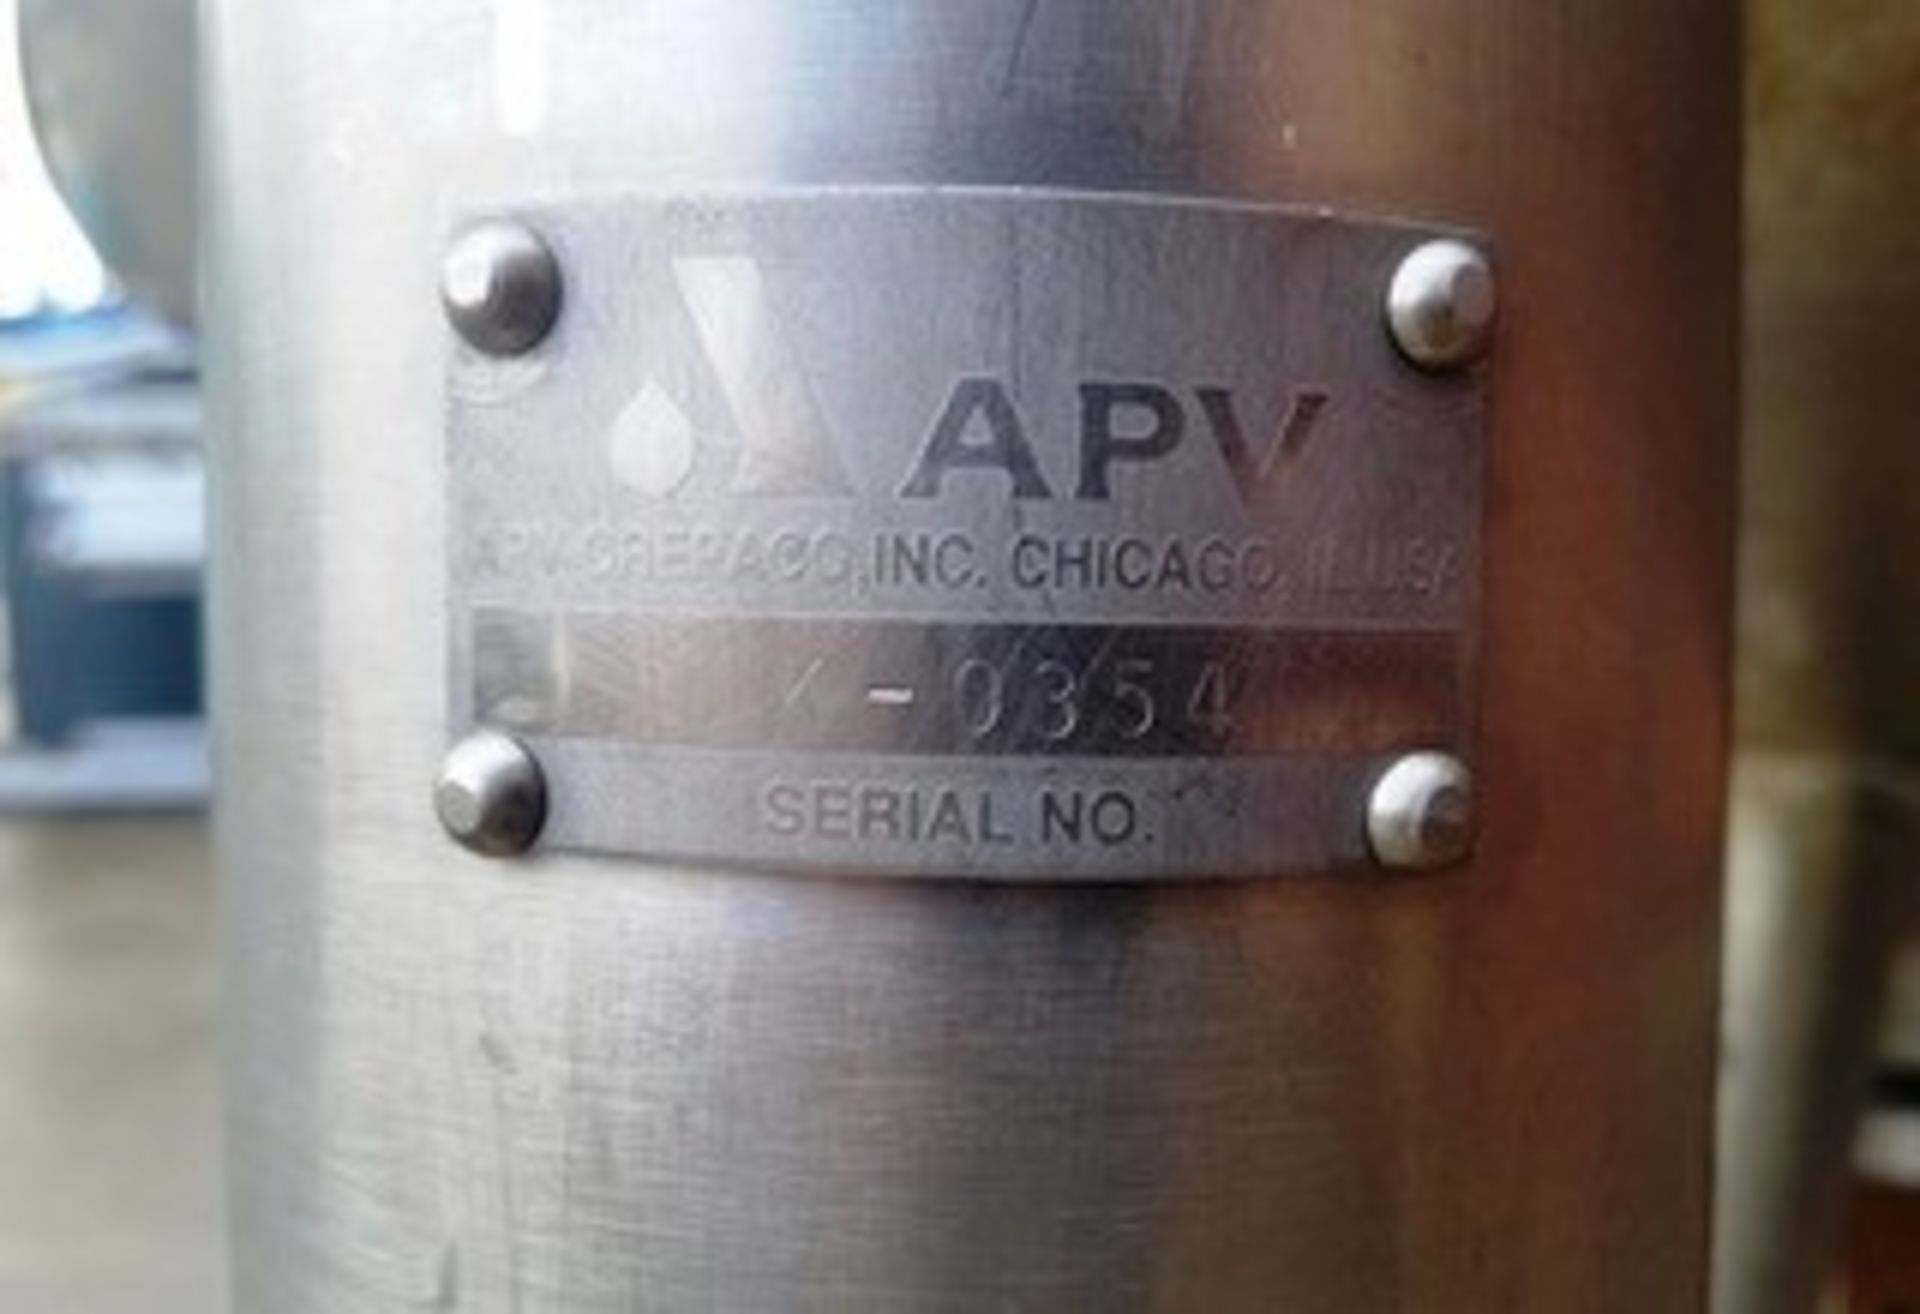 APV 300 Gallon Likwifier Round with Scrape Surface Mixing Tank. Serial # K-0354. Measuring 48" - Image 4 of 4